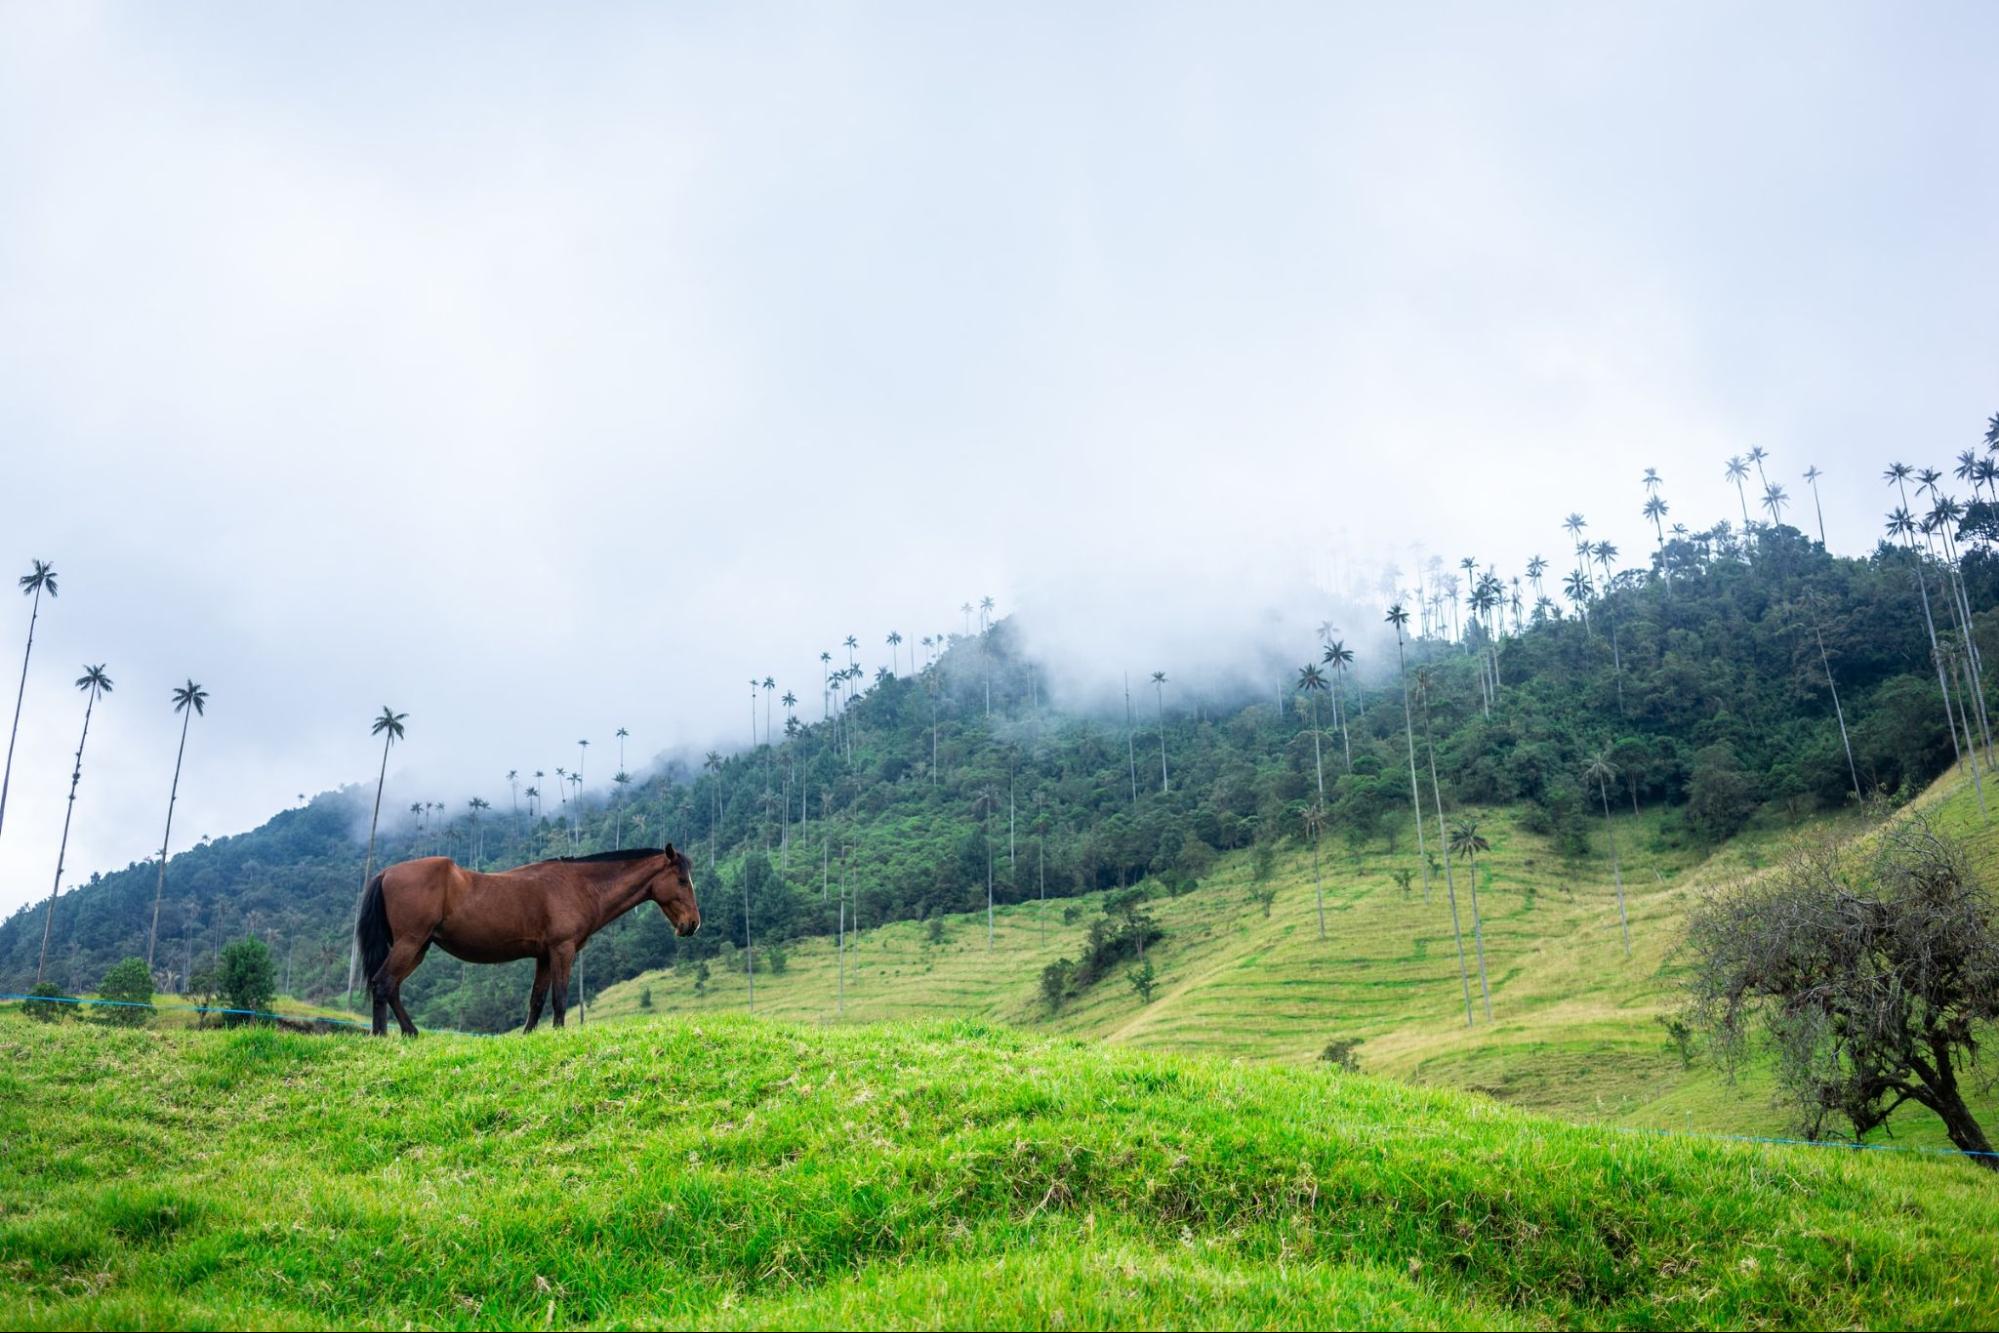 A horse grazes in a lush, green valley.